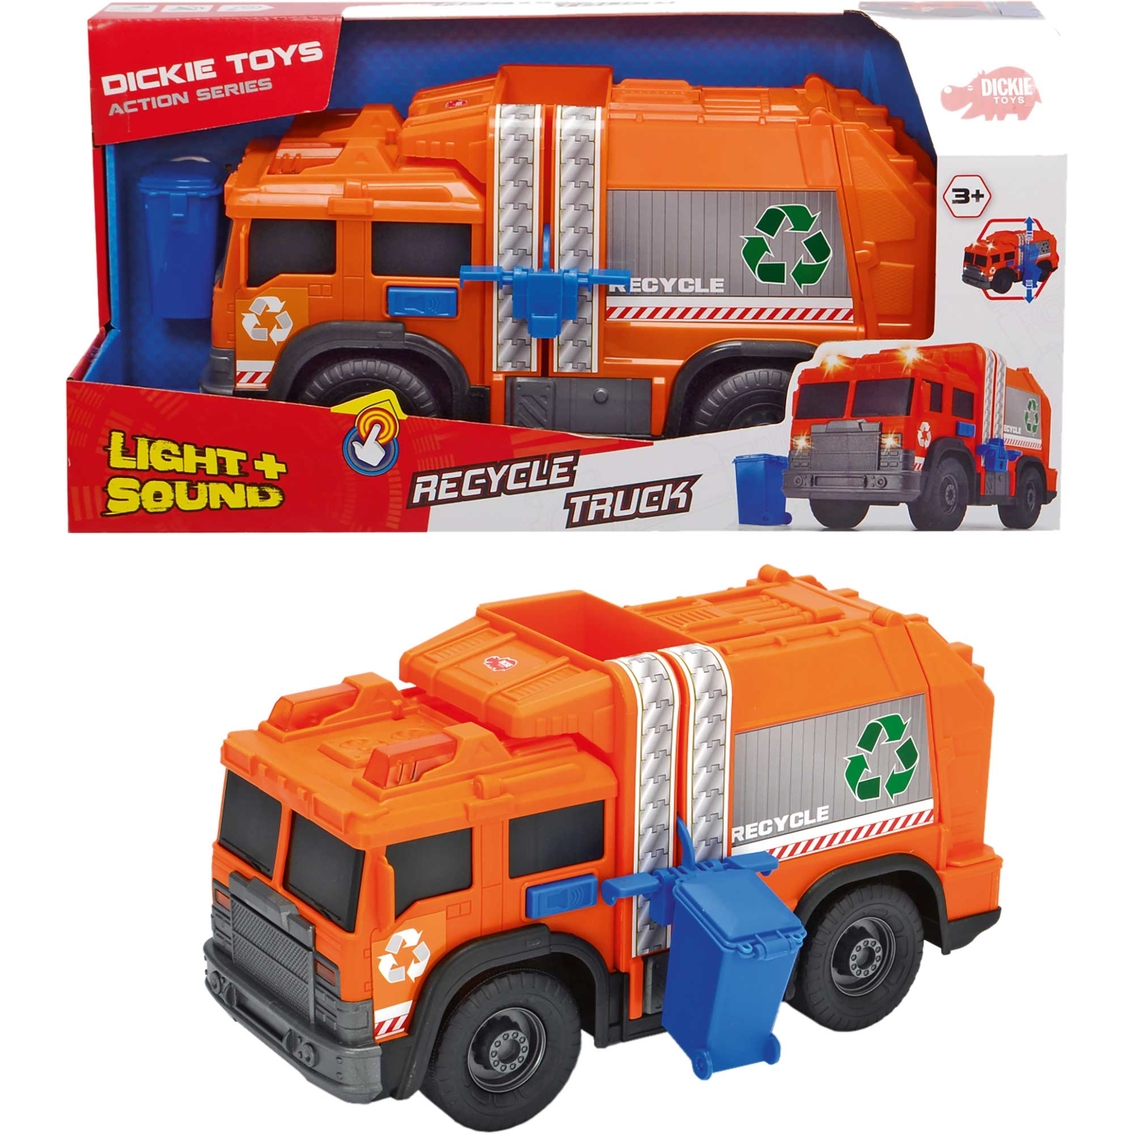 Dickie Toys Light and Sound Recycle Truck - Image 4 of 4